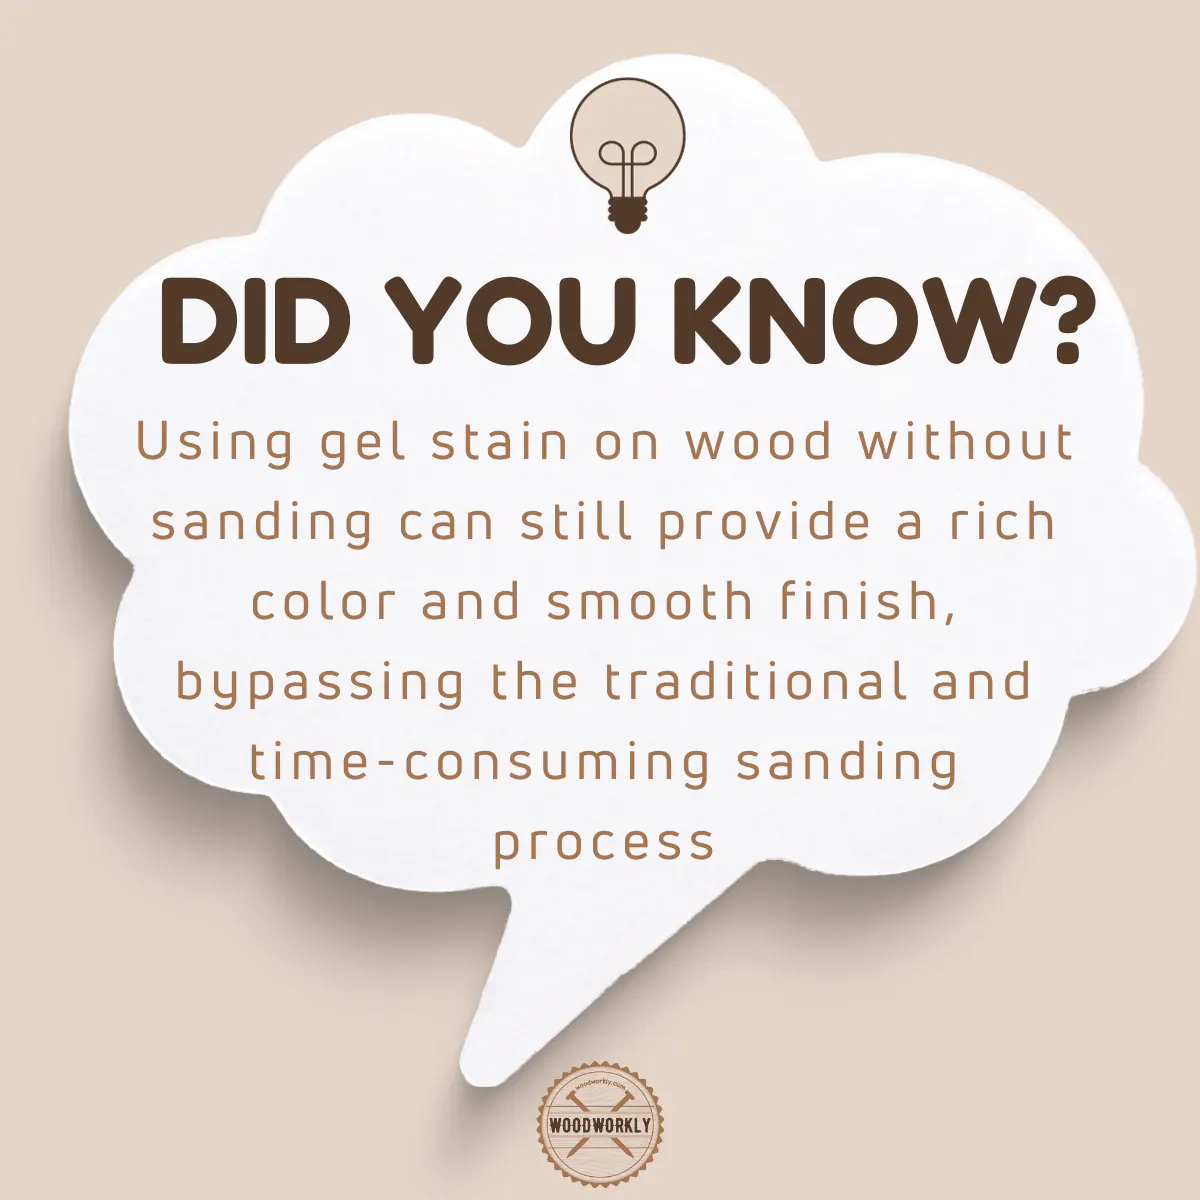 Did you know fact about staining wood without sanding